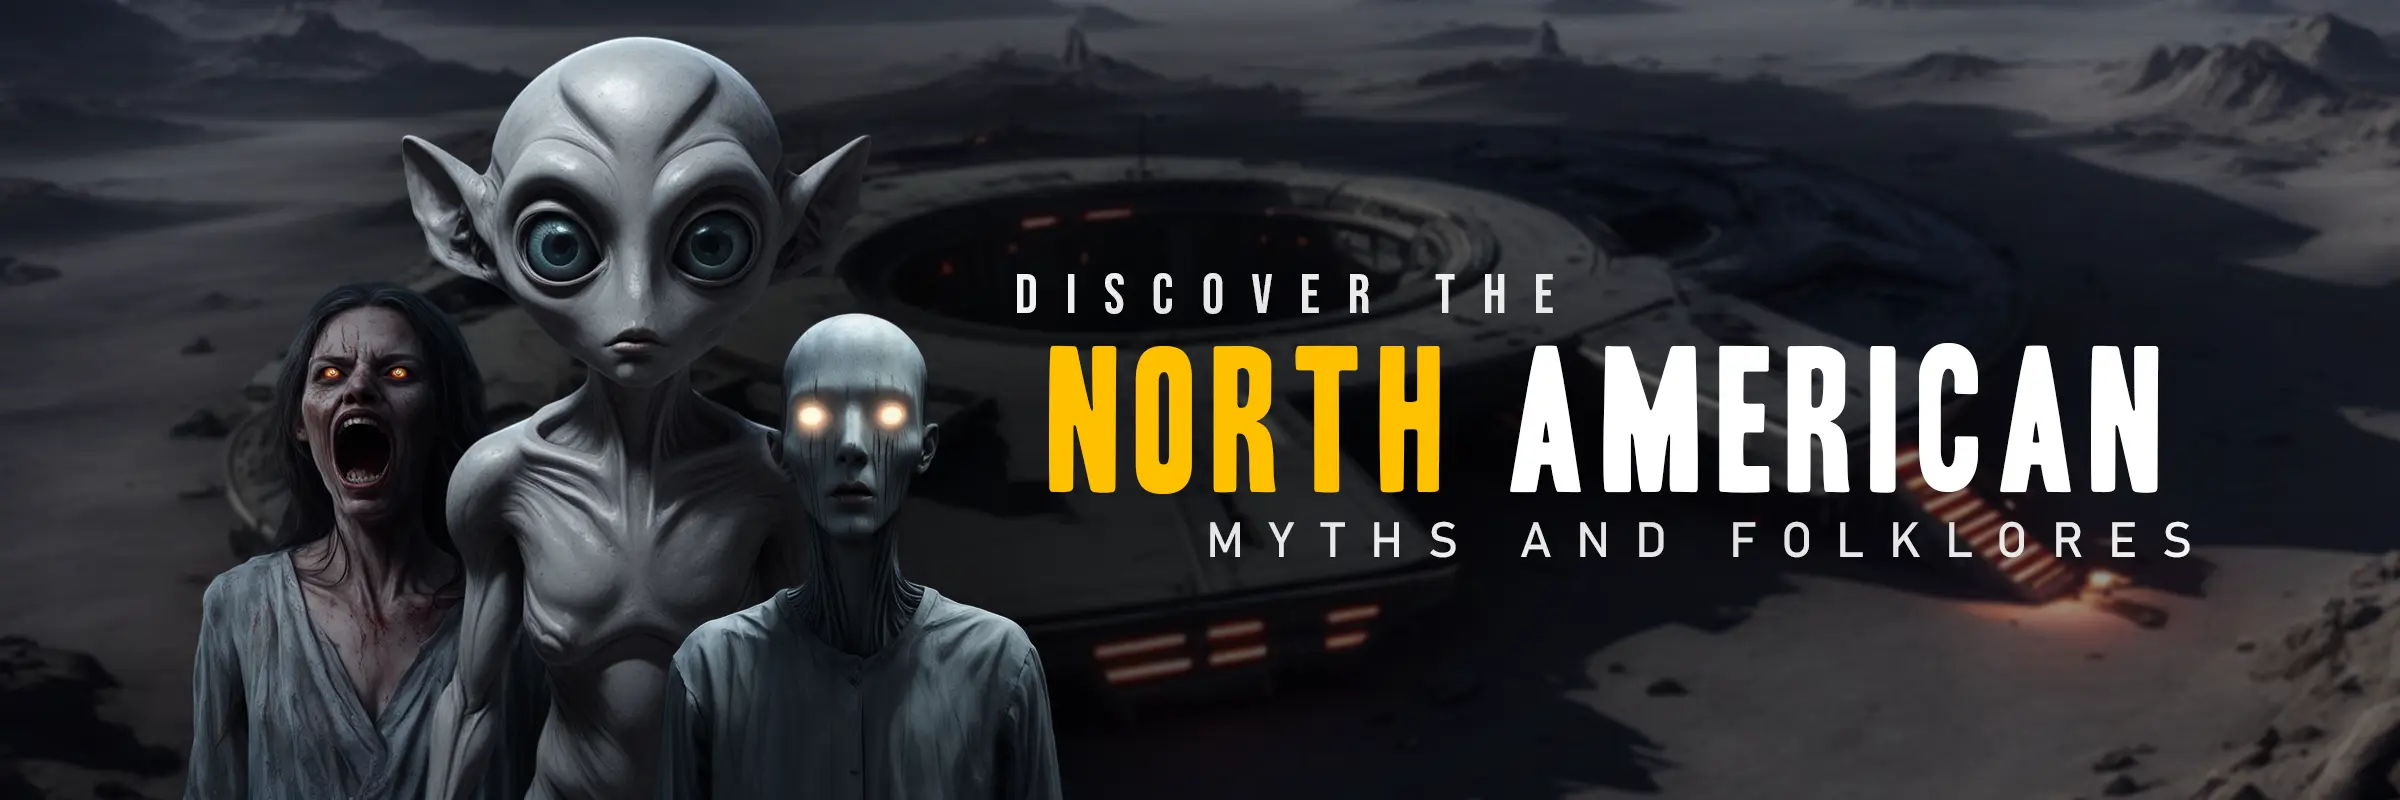 NORTH AMERICAN FOLKLORE AND MYTHS